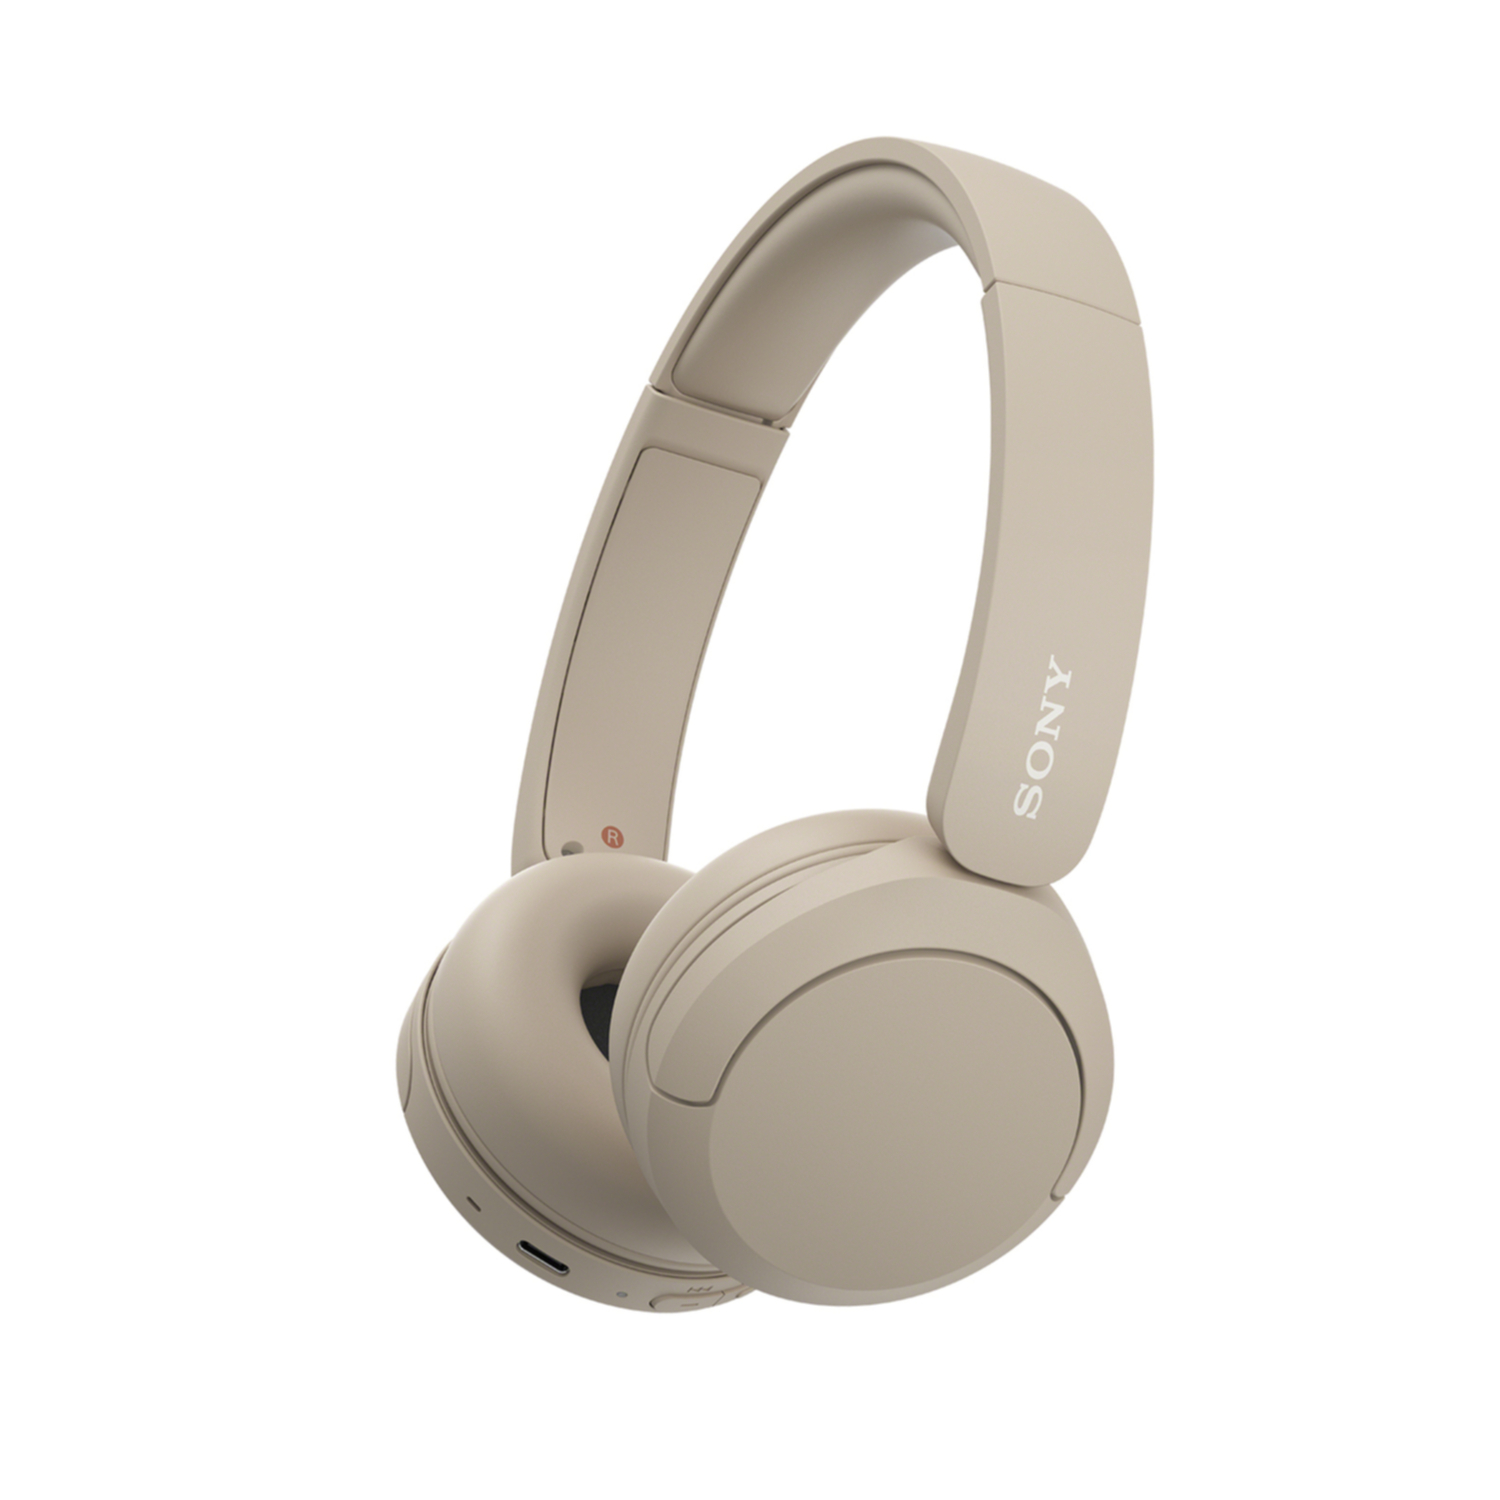 SONY - Cuffie Bluetooth On ear WHCH520C.CE7 - Cappuccino